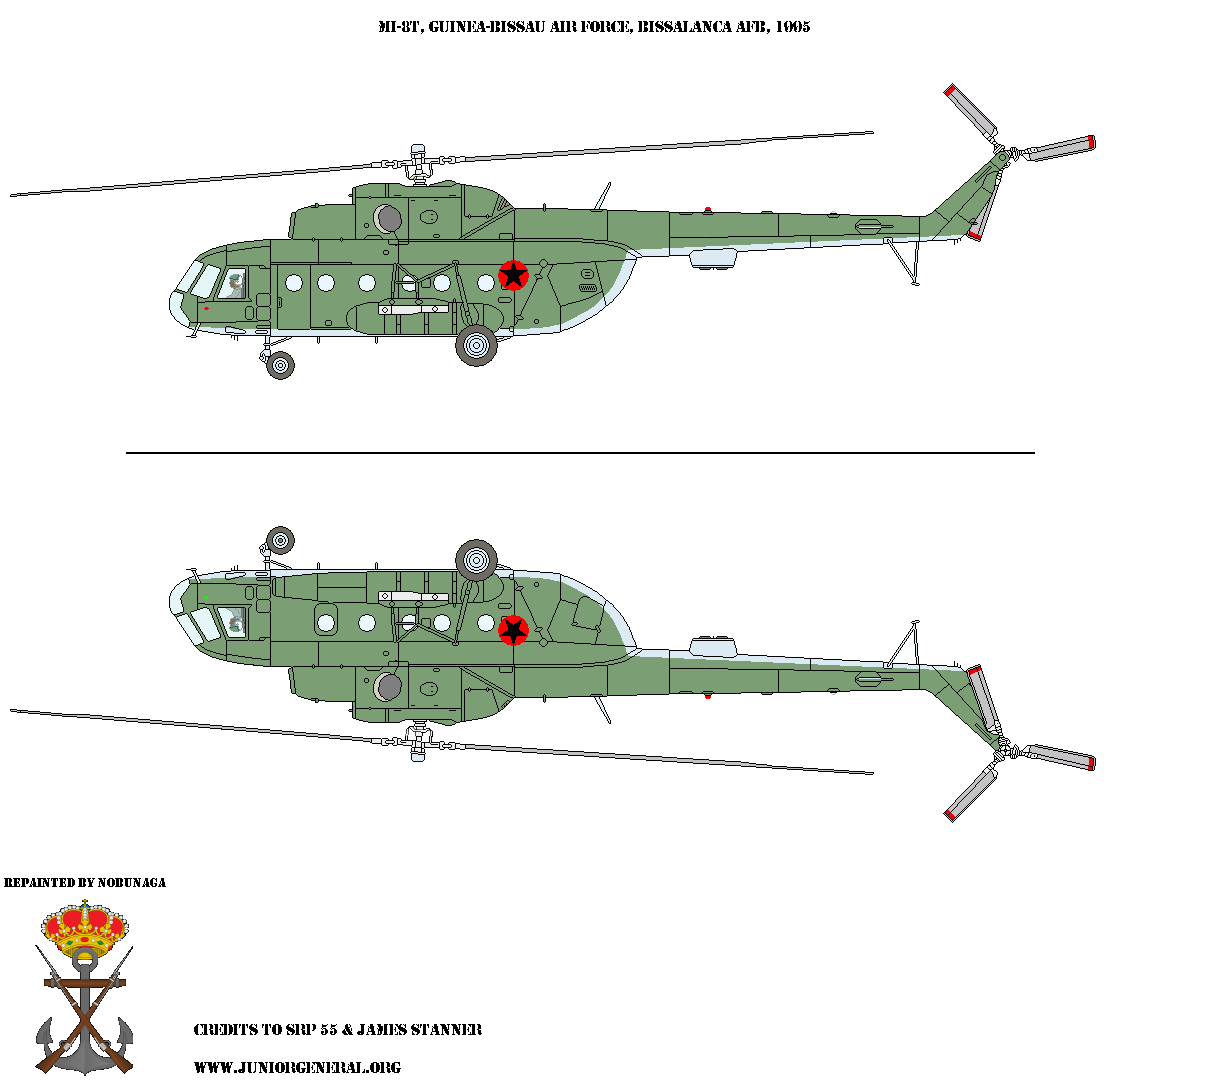 GuineaBissau Mi-8T Helicopter